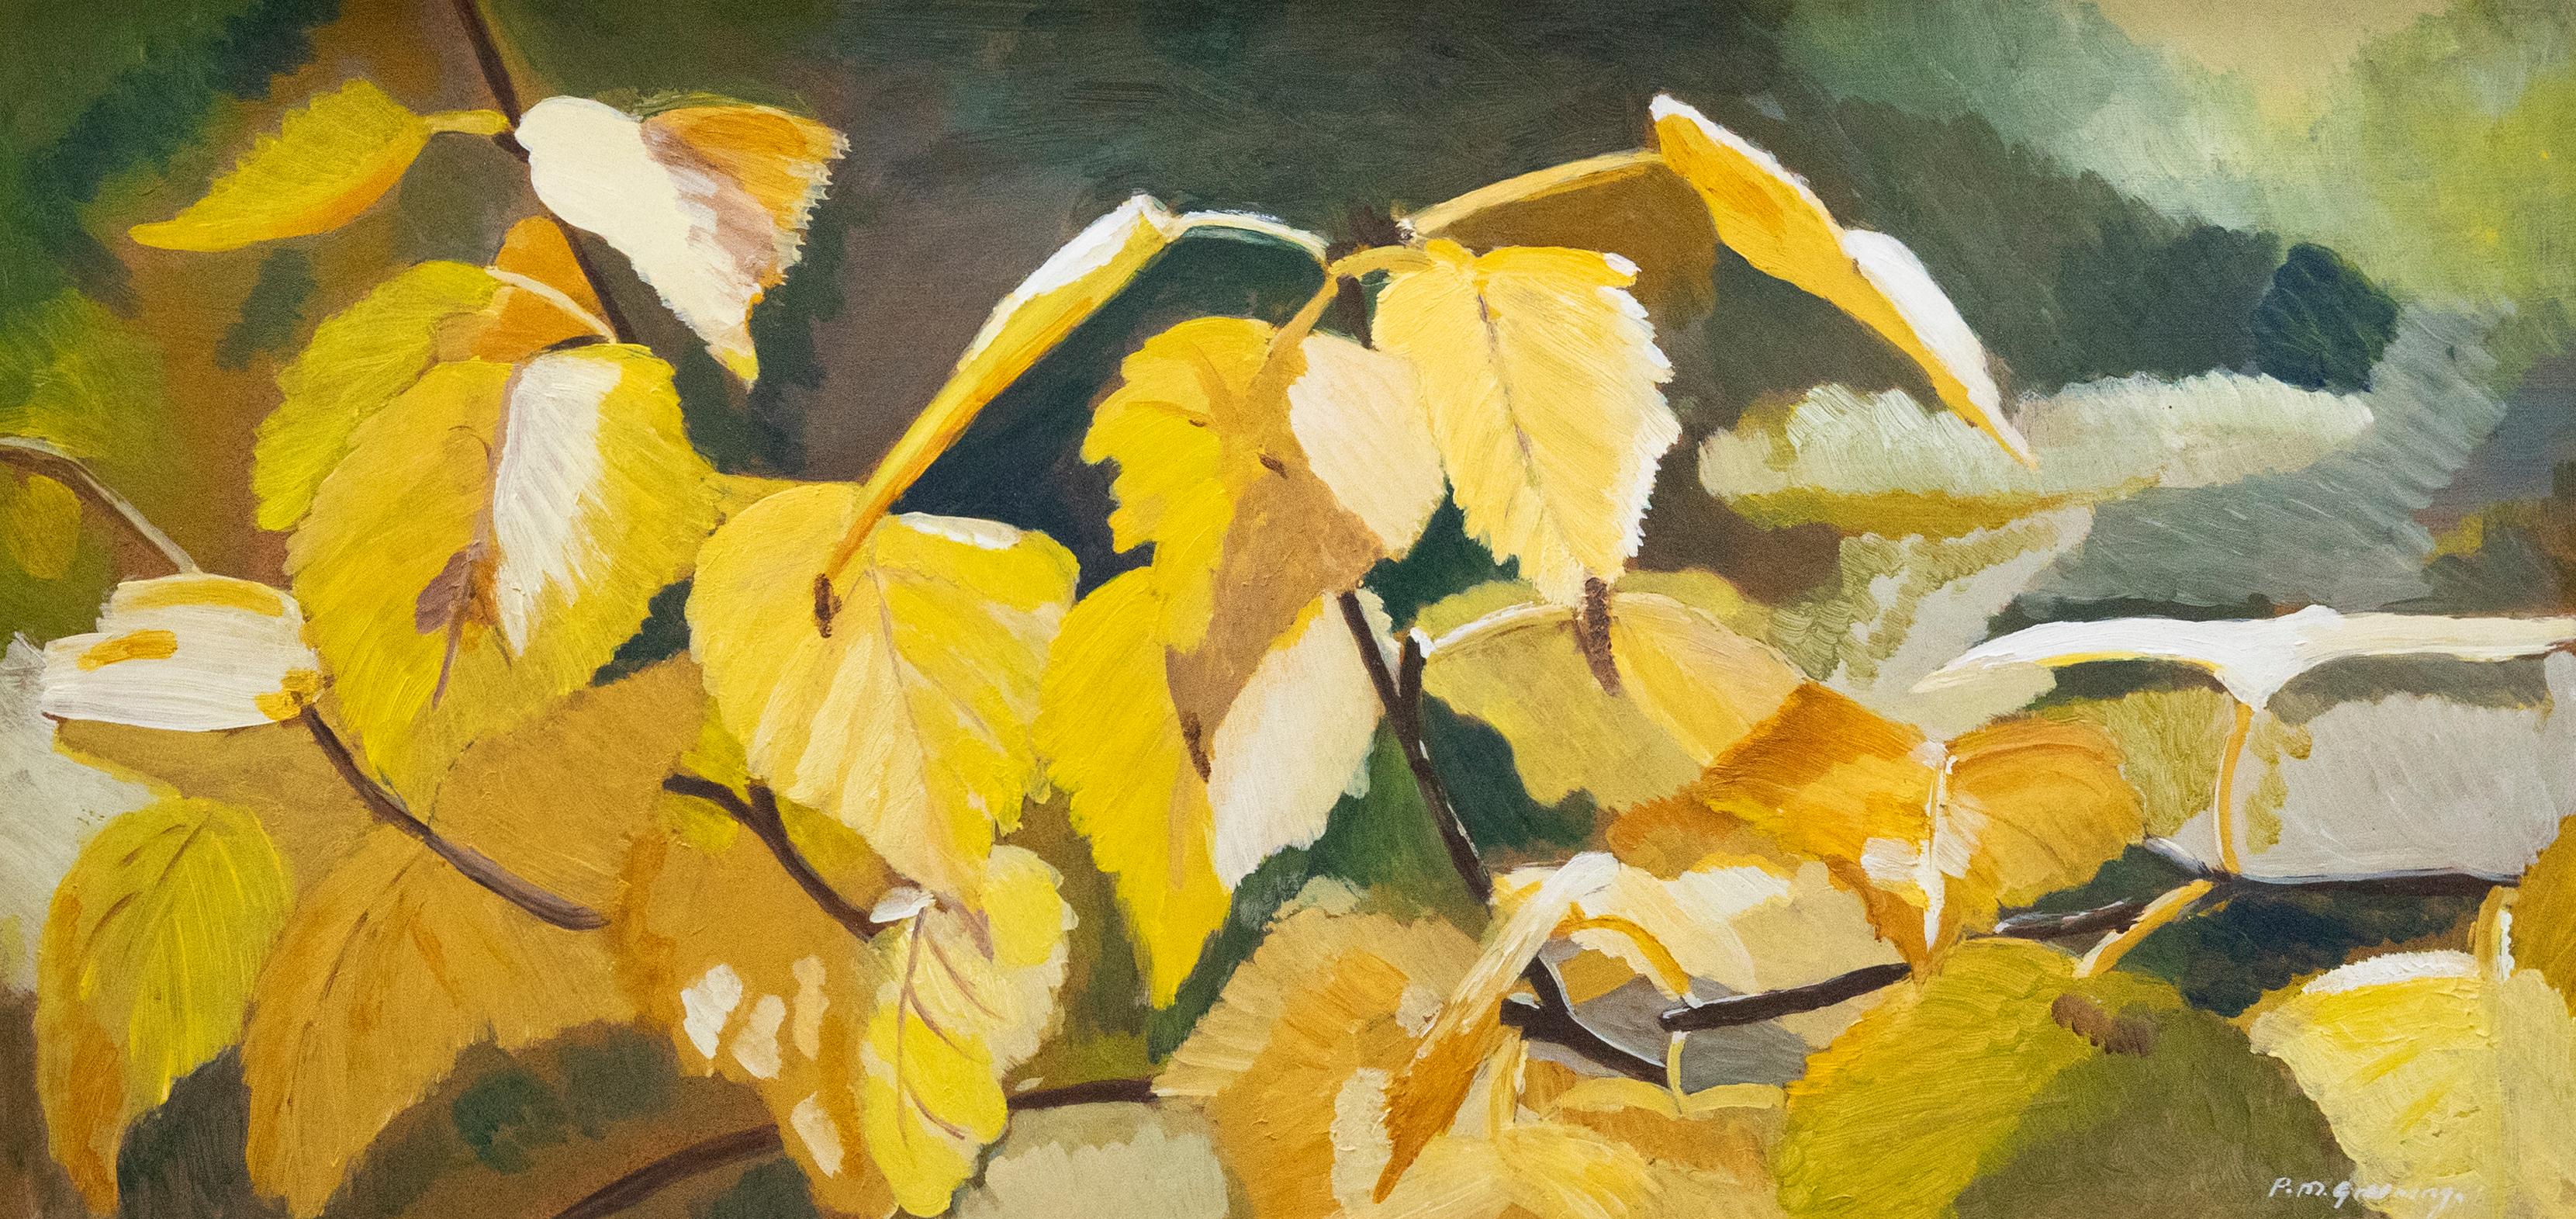 P. M. Greening - Framed 20th Century Oil, Rustling Leaves - Painting by Unknown